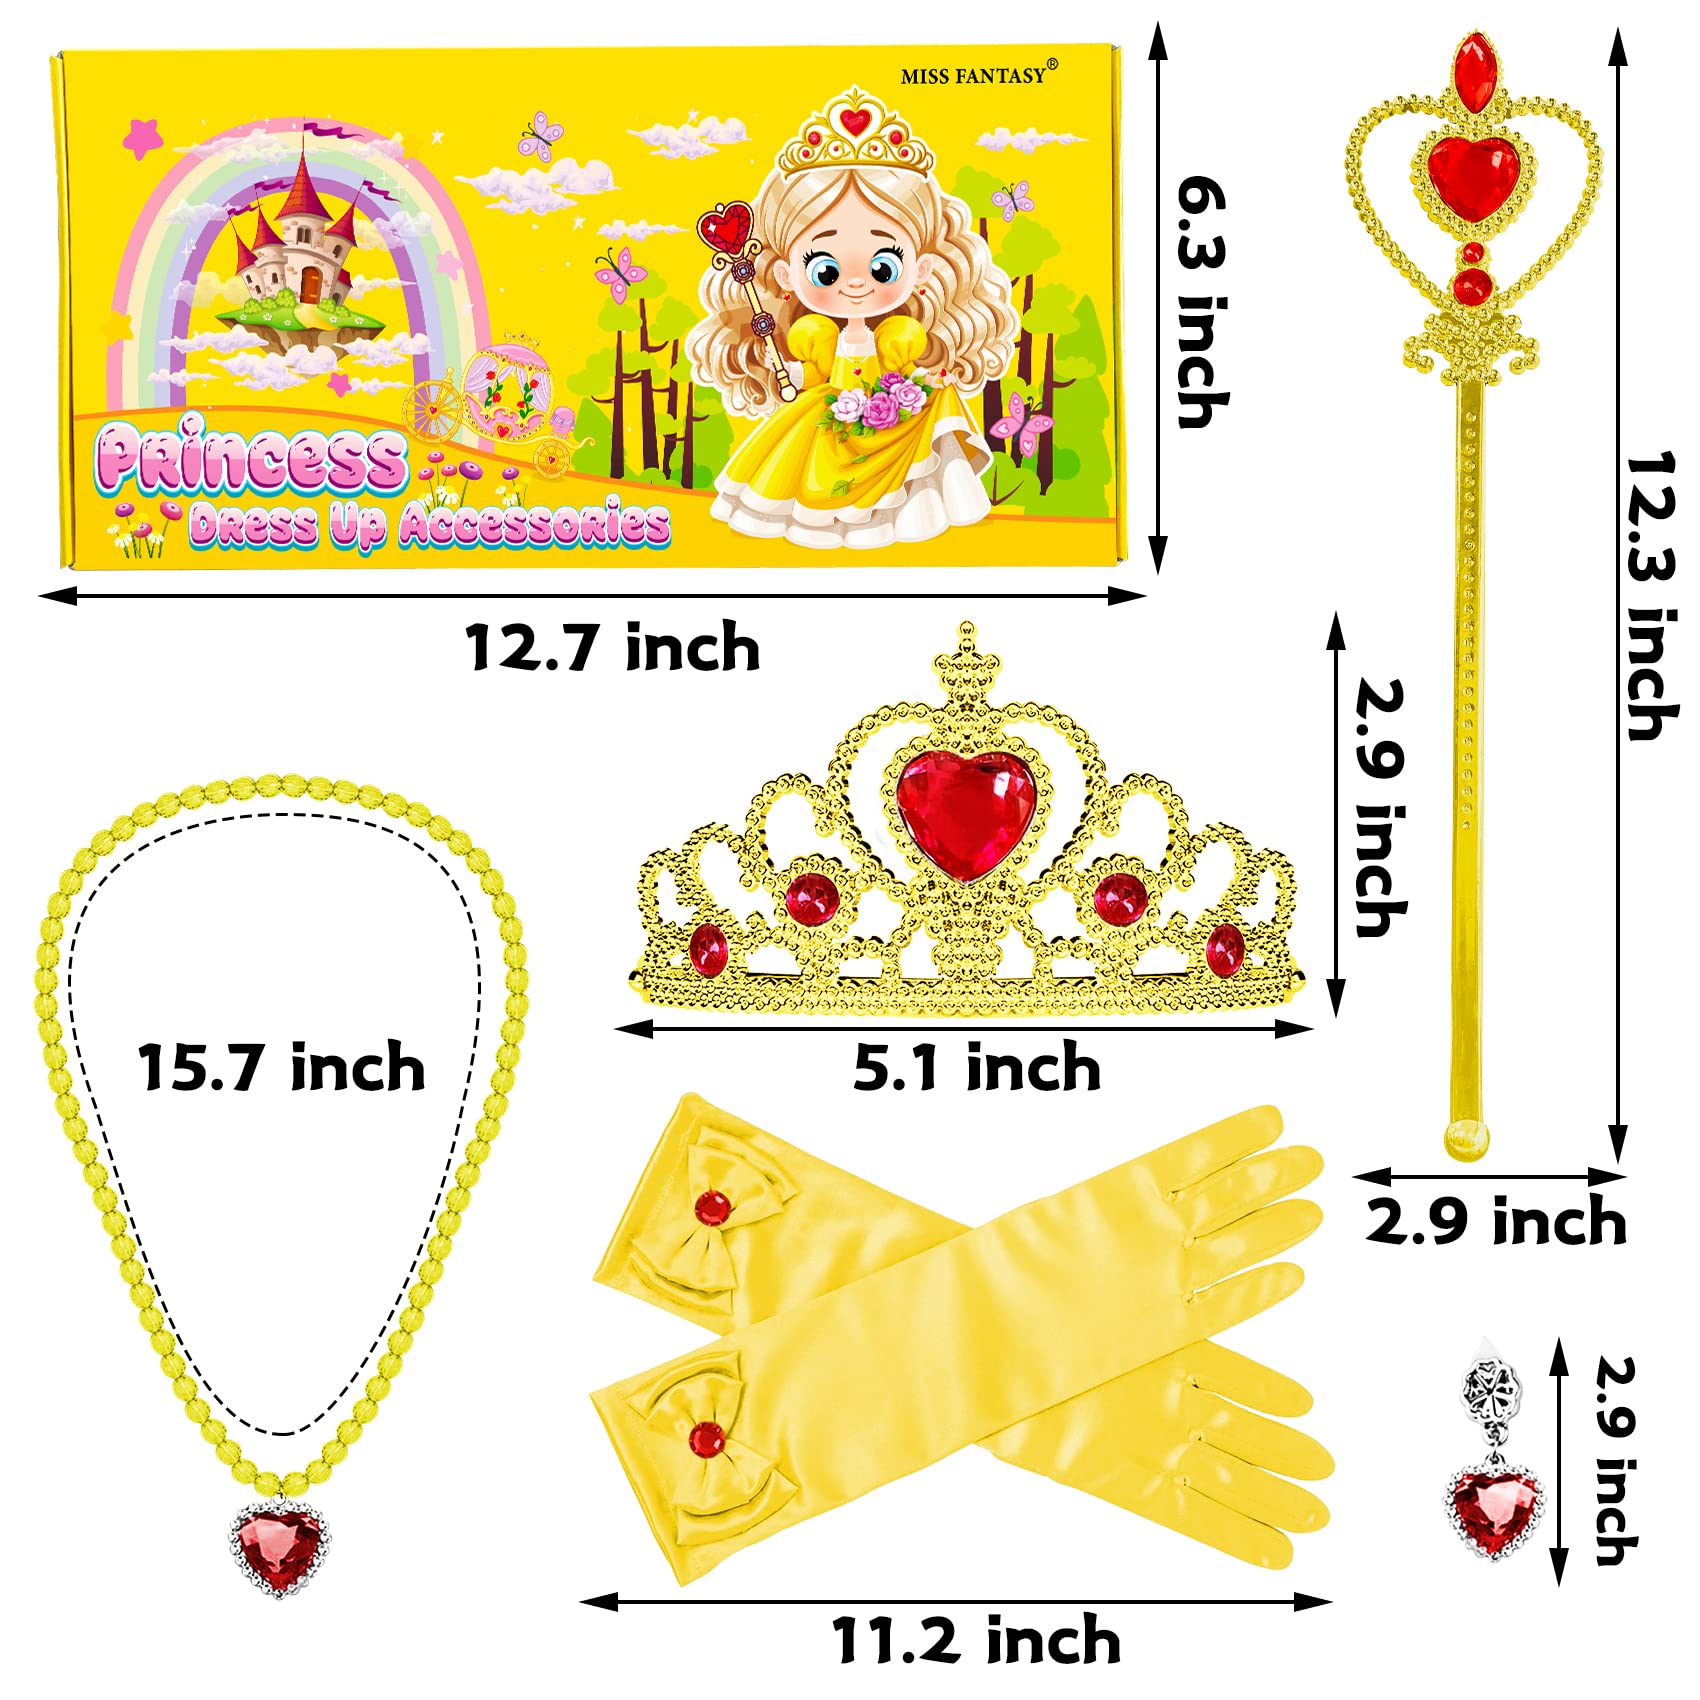 MISS FANTASY Princess Dress Up Accessories,Cosplay Accessories for Kids Girls, Princess Dressed up Crown,Wand,Gloves,Necklace,Earrings,Bracelet Gift Sets for Little Girls Halloween Party Cosplay Set